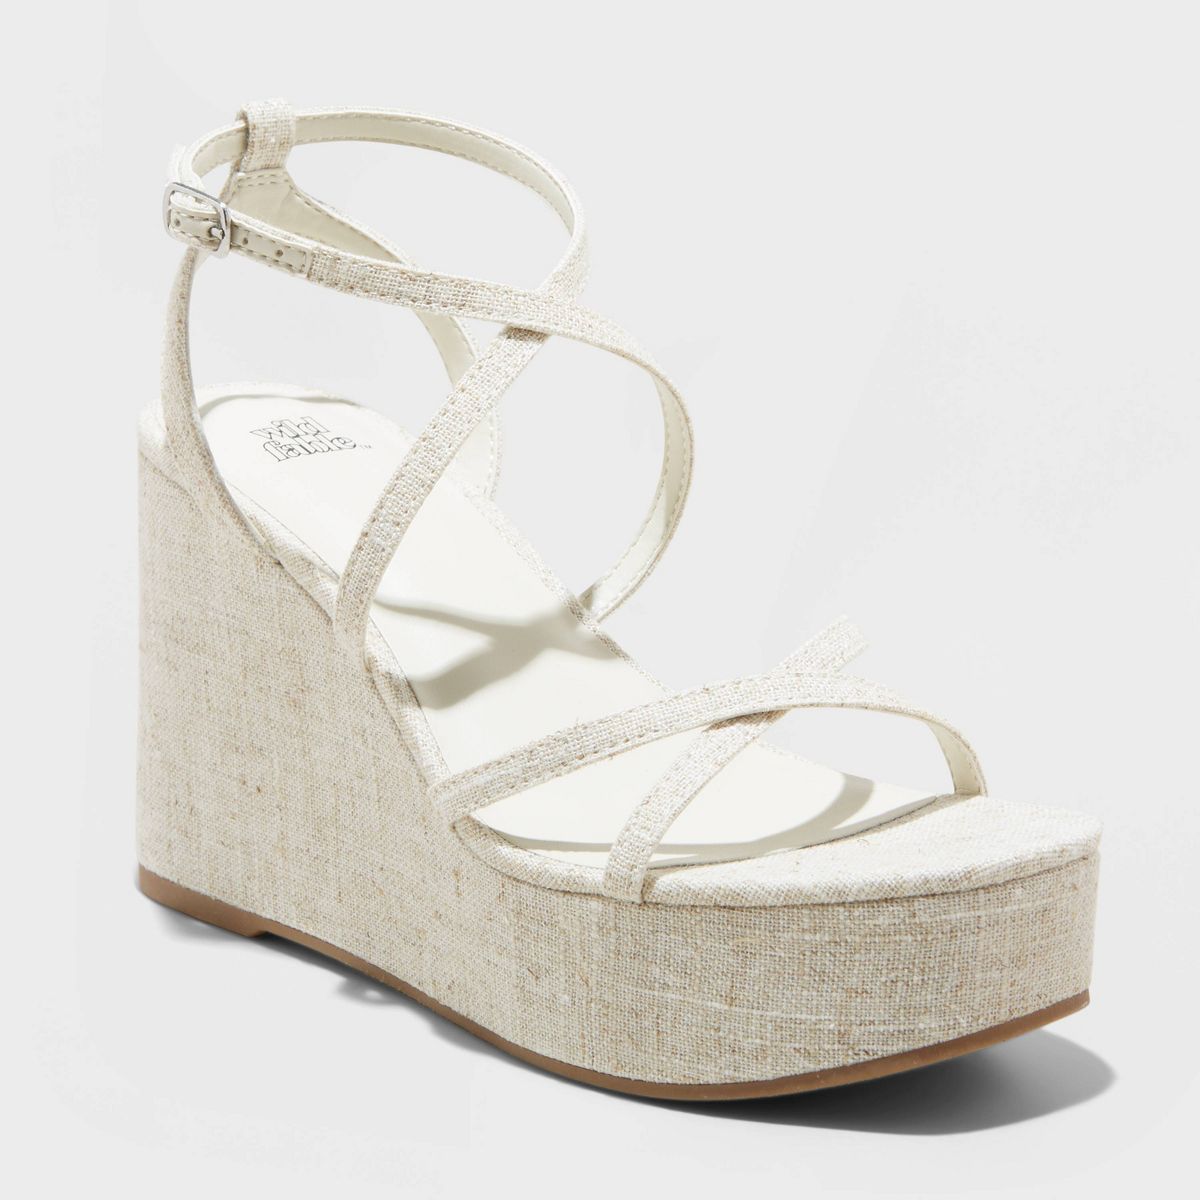 Women's Ronnie Strappy Platform Wedge Heels with Memory Foam Insole - Wild Fable™ Cream 8 | Target